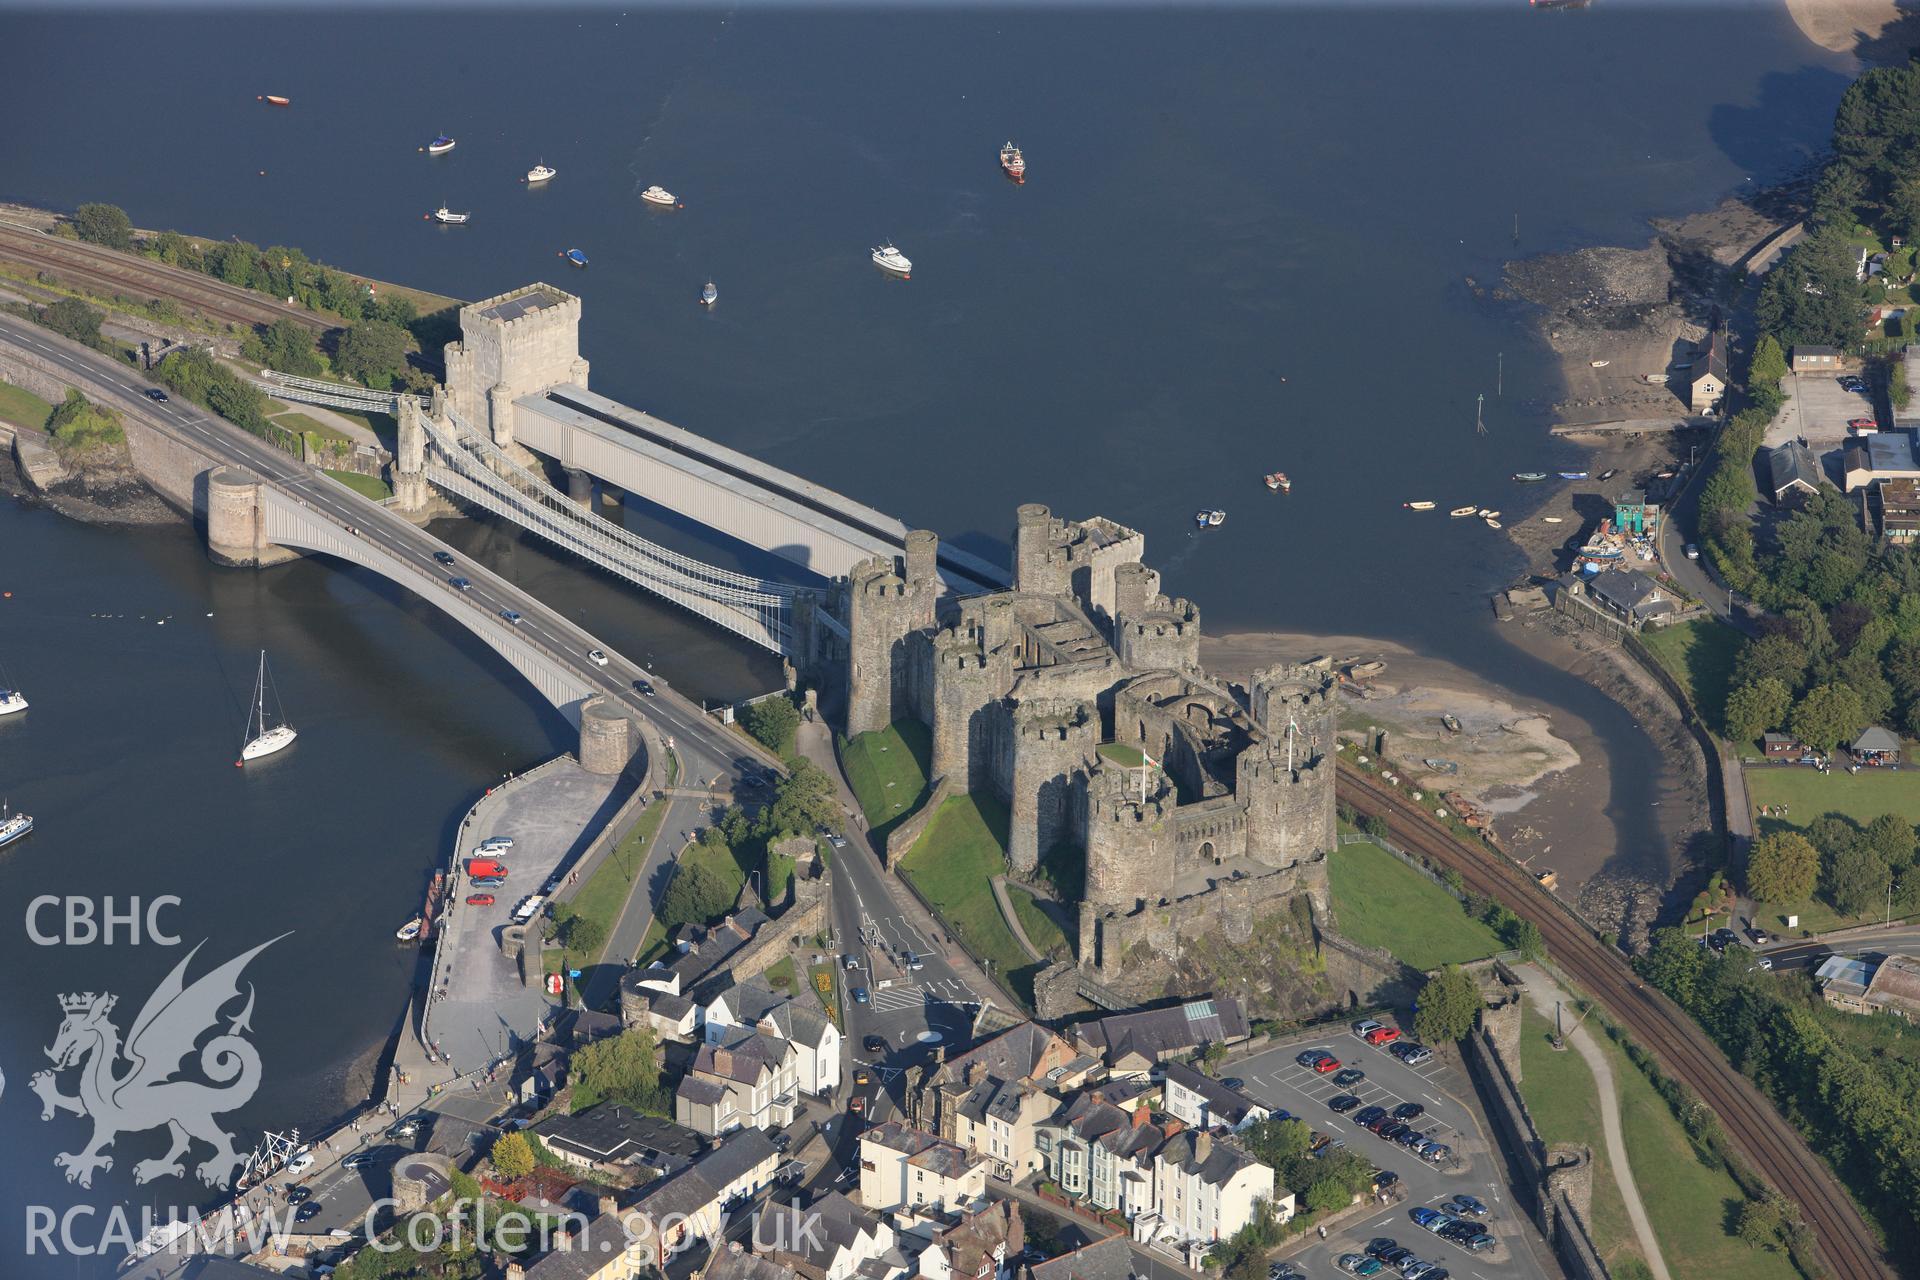 RCAHMW colour oblique photograph of Conwy Castle. Taken by Toby Driver and Oliver Davies on 27/07/2011.